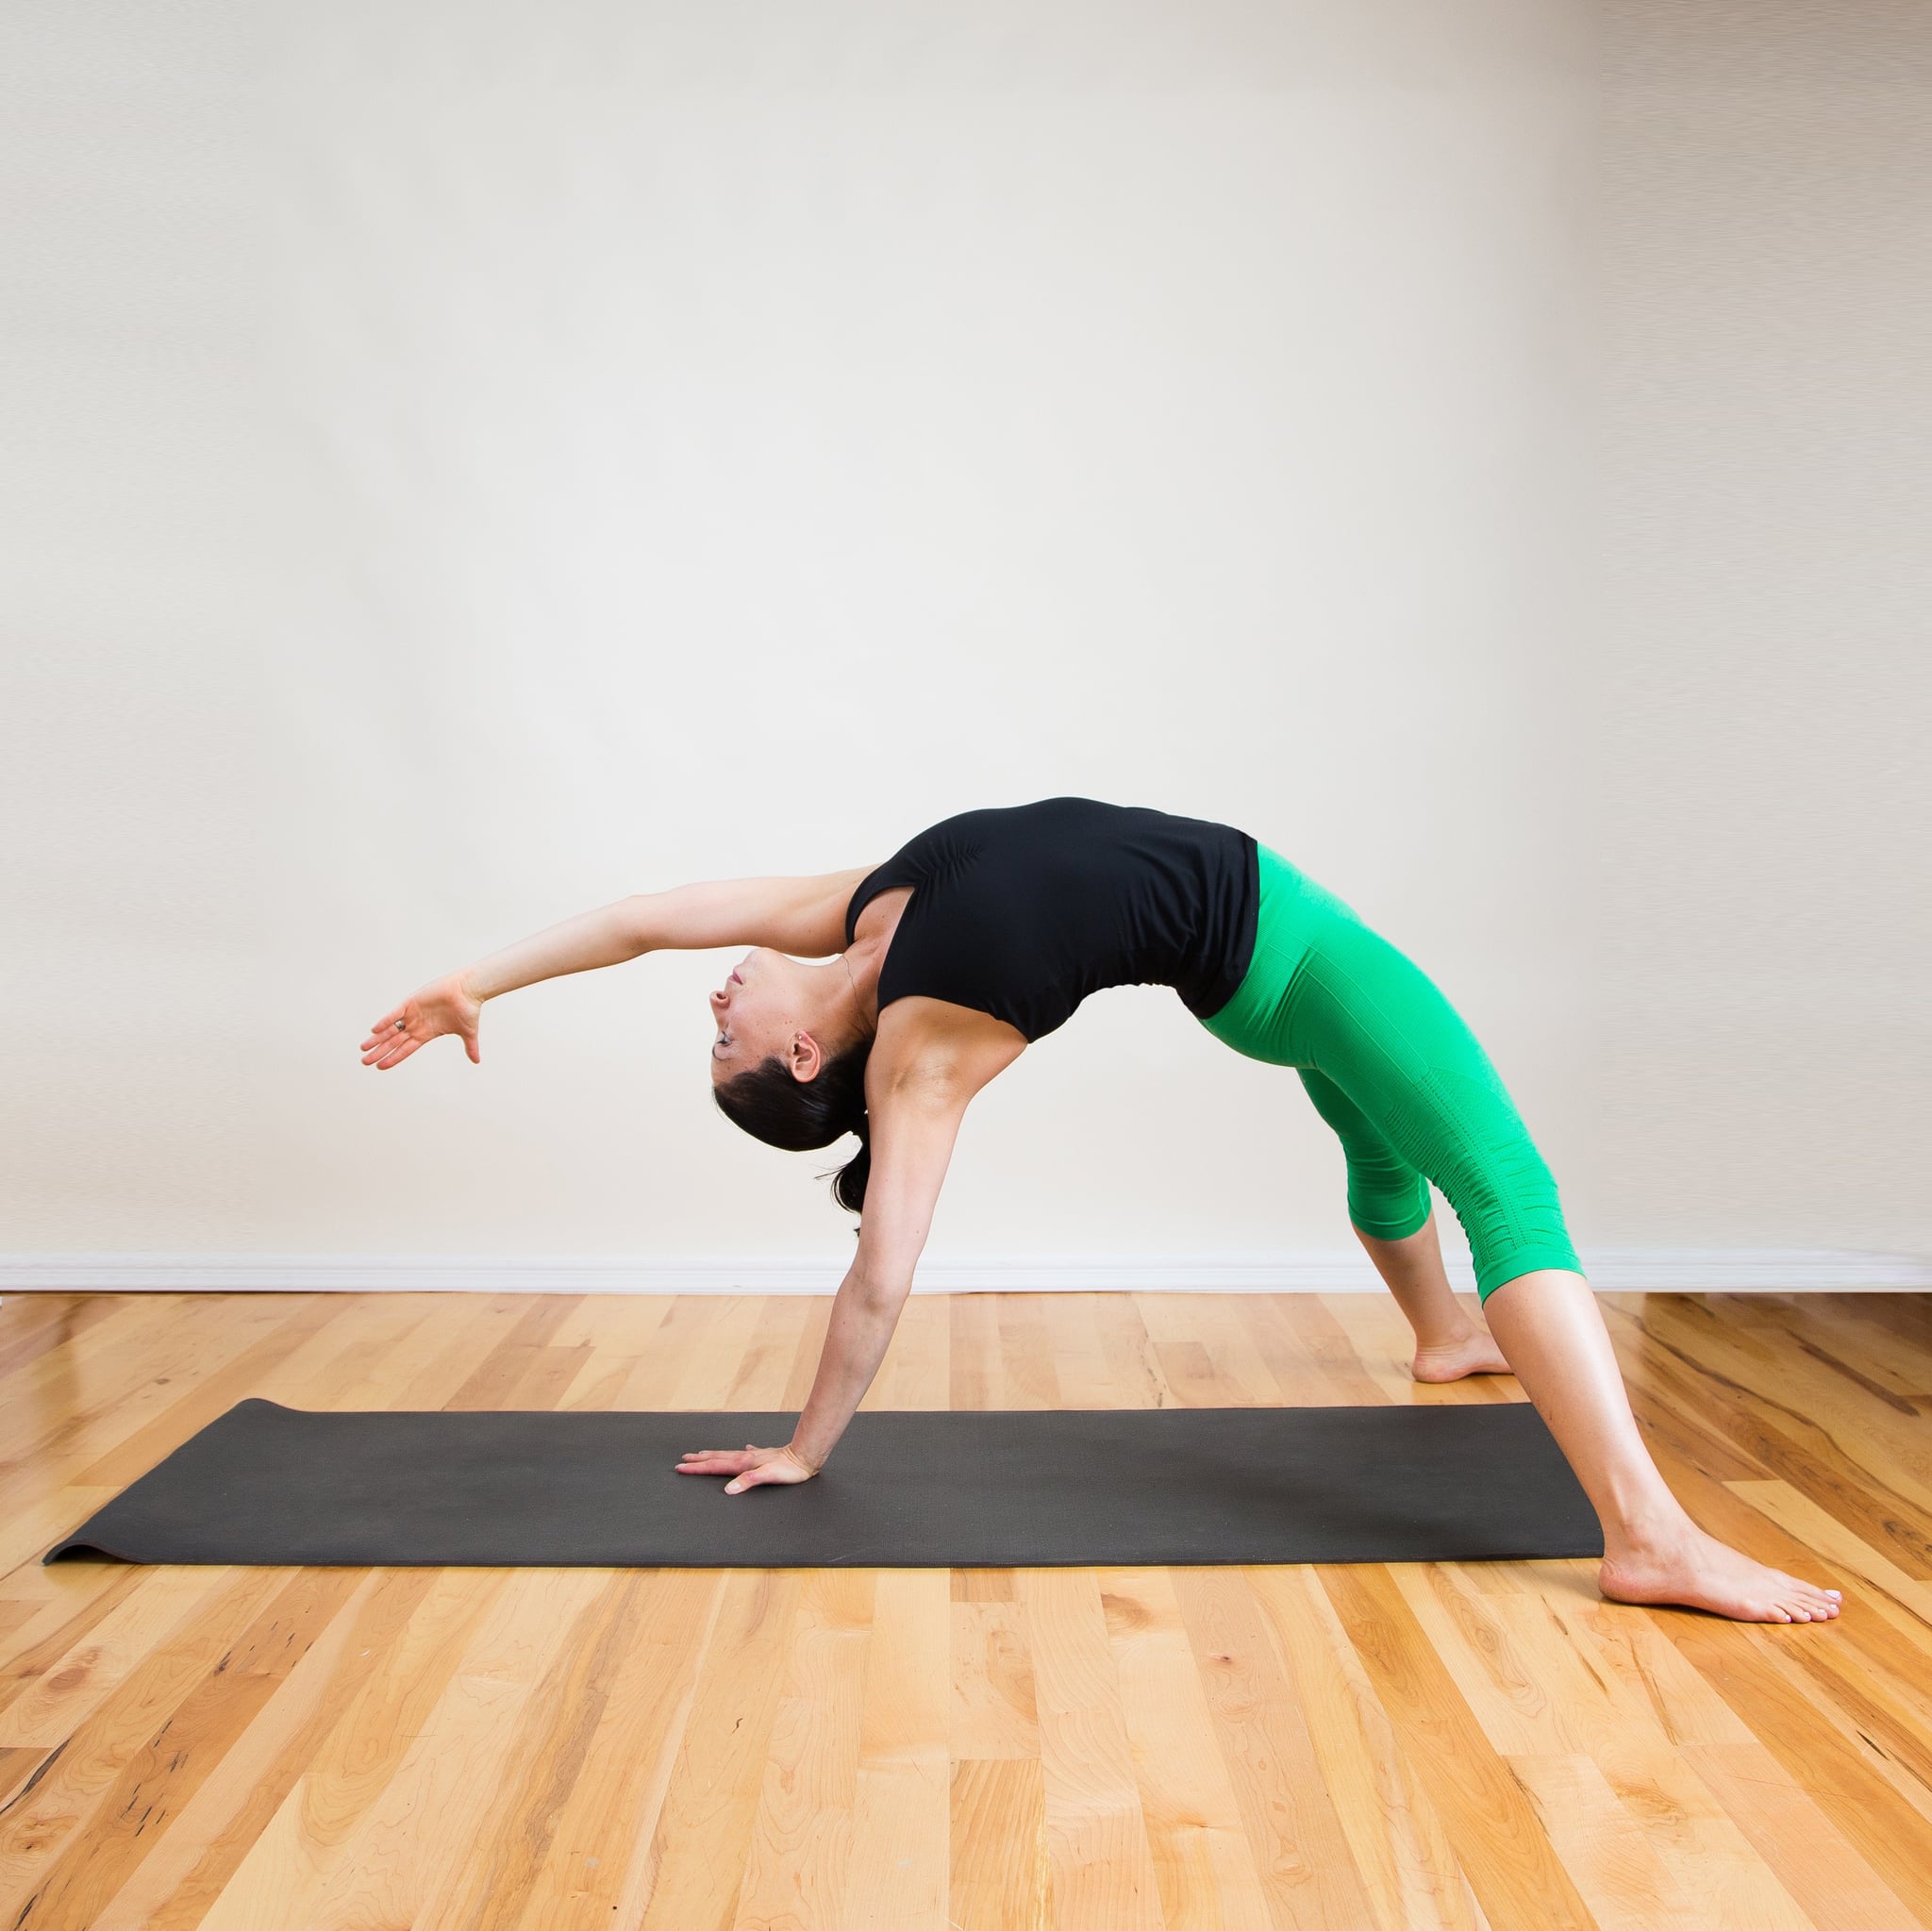 Easy Yoga - 7-Minute Sequence Poses For Beginners